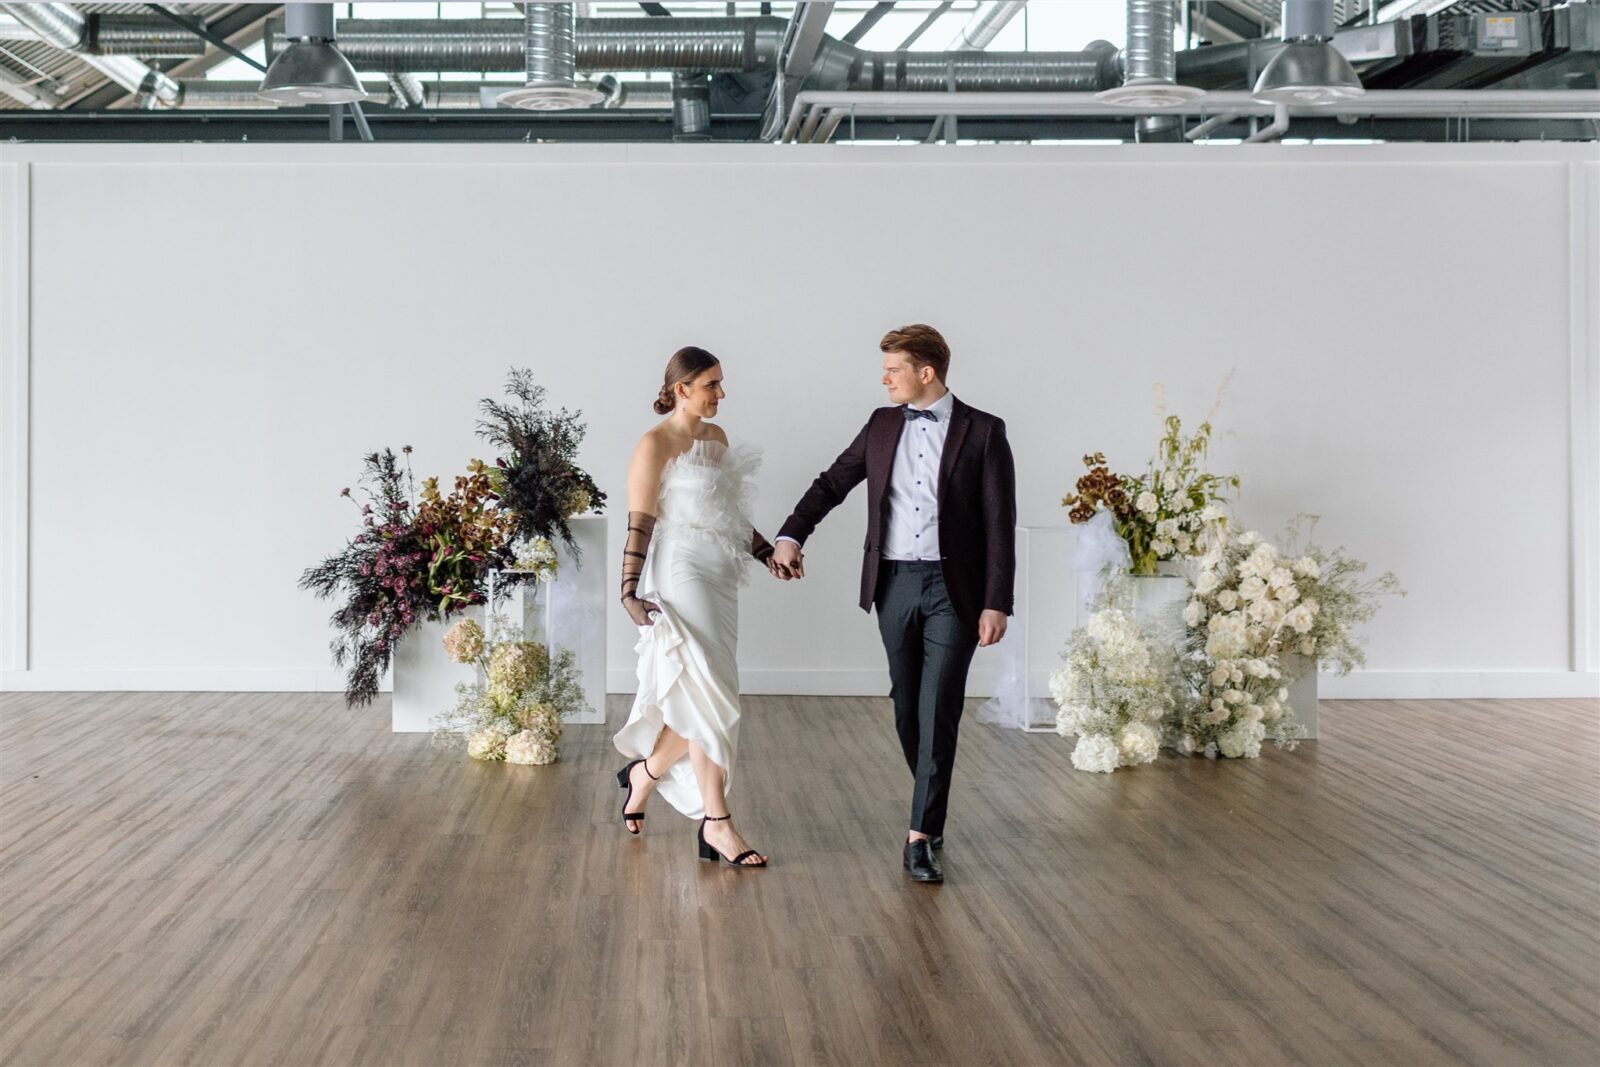 Couple dancing at sophisticated and minimalist wedding at The Wallace Venue in Vancouver, BC. Chic wedding inspiration, designed by Rebekah Brontë Designs.